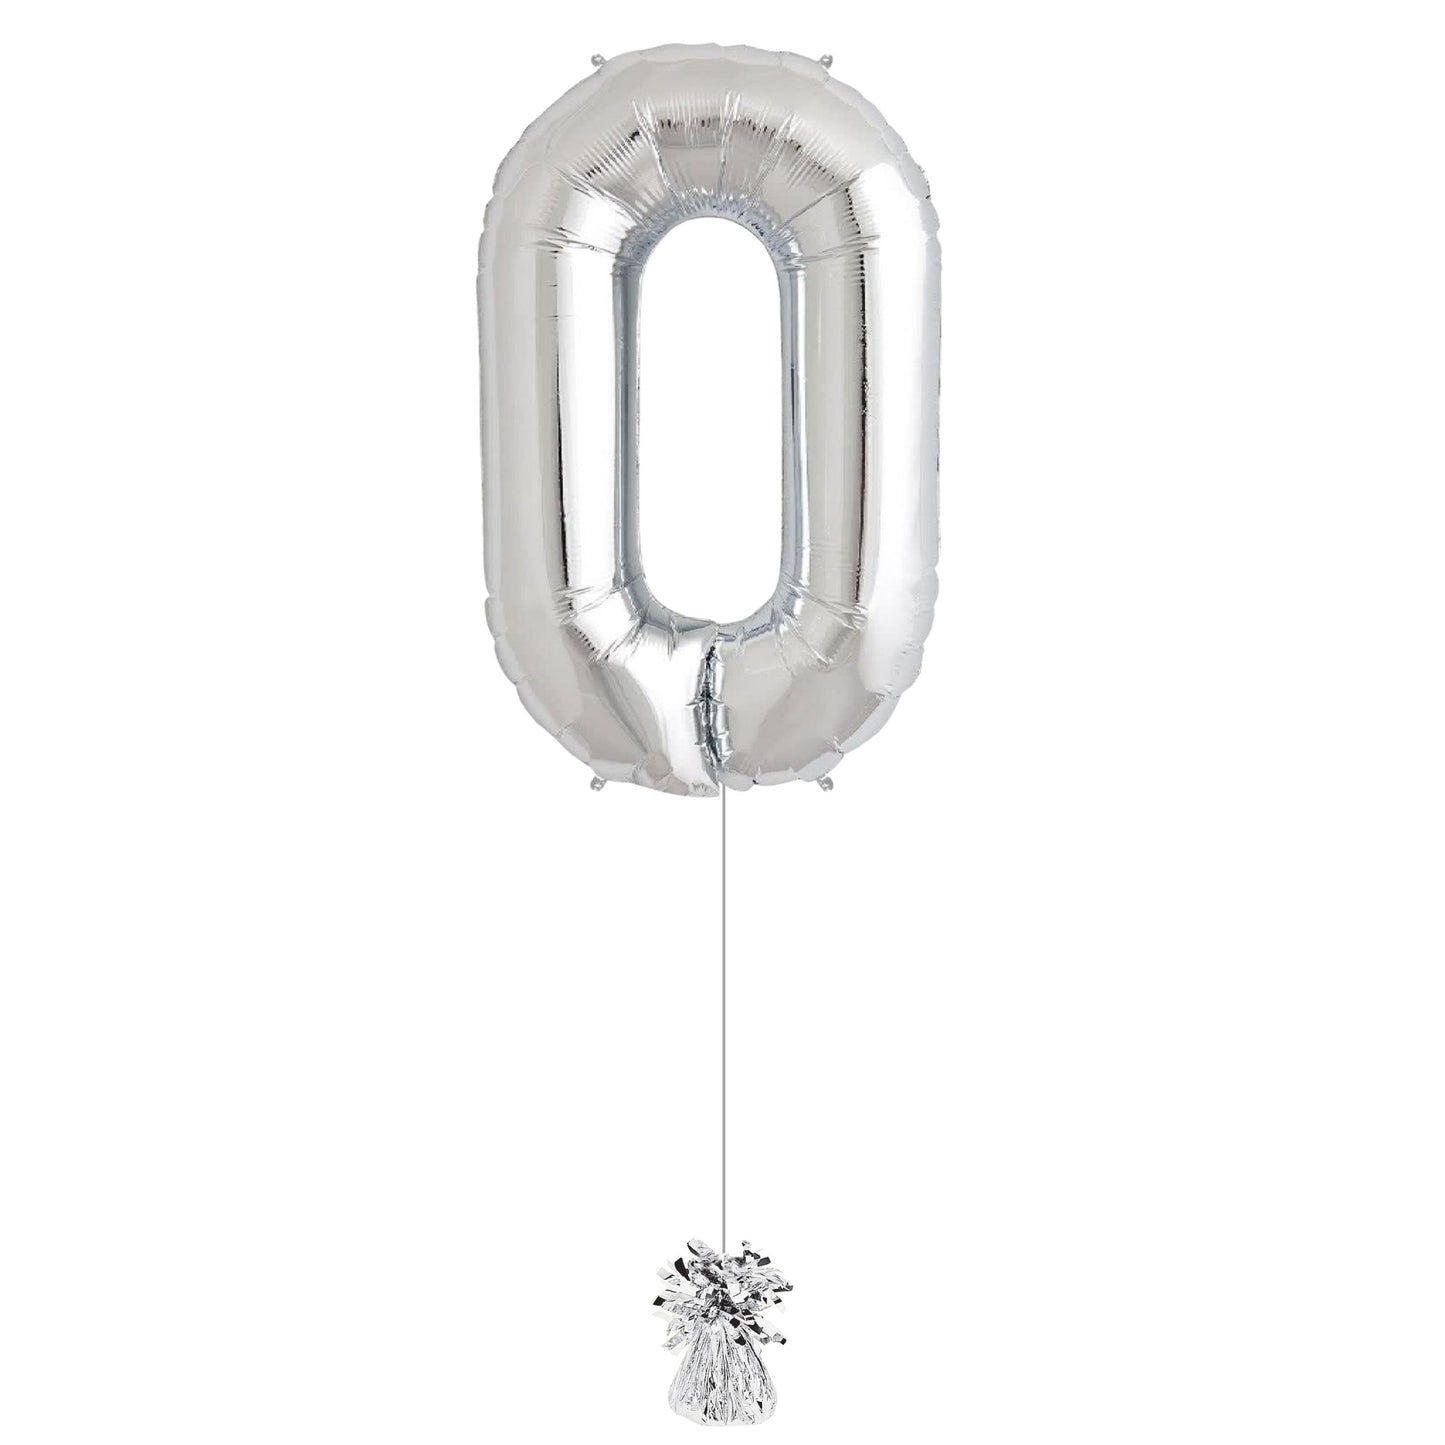 34 inch Silver Balloon Number 0 Helium filled